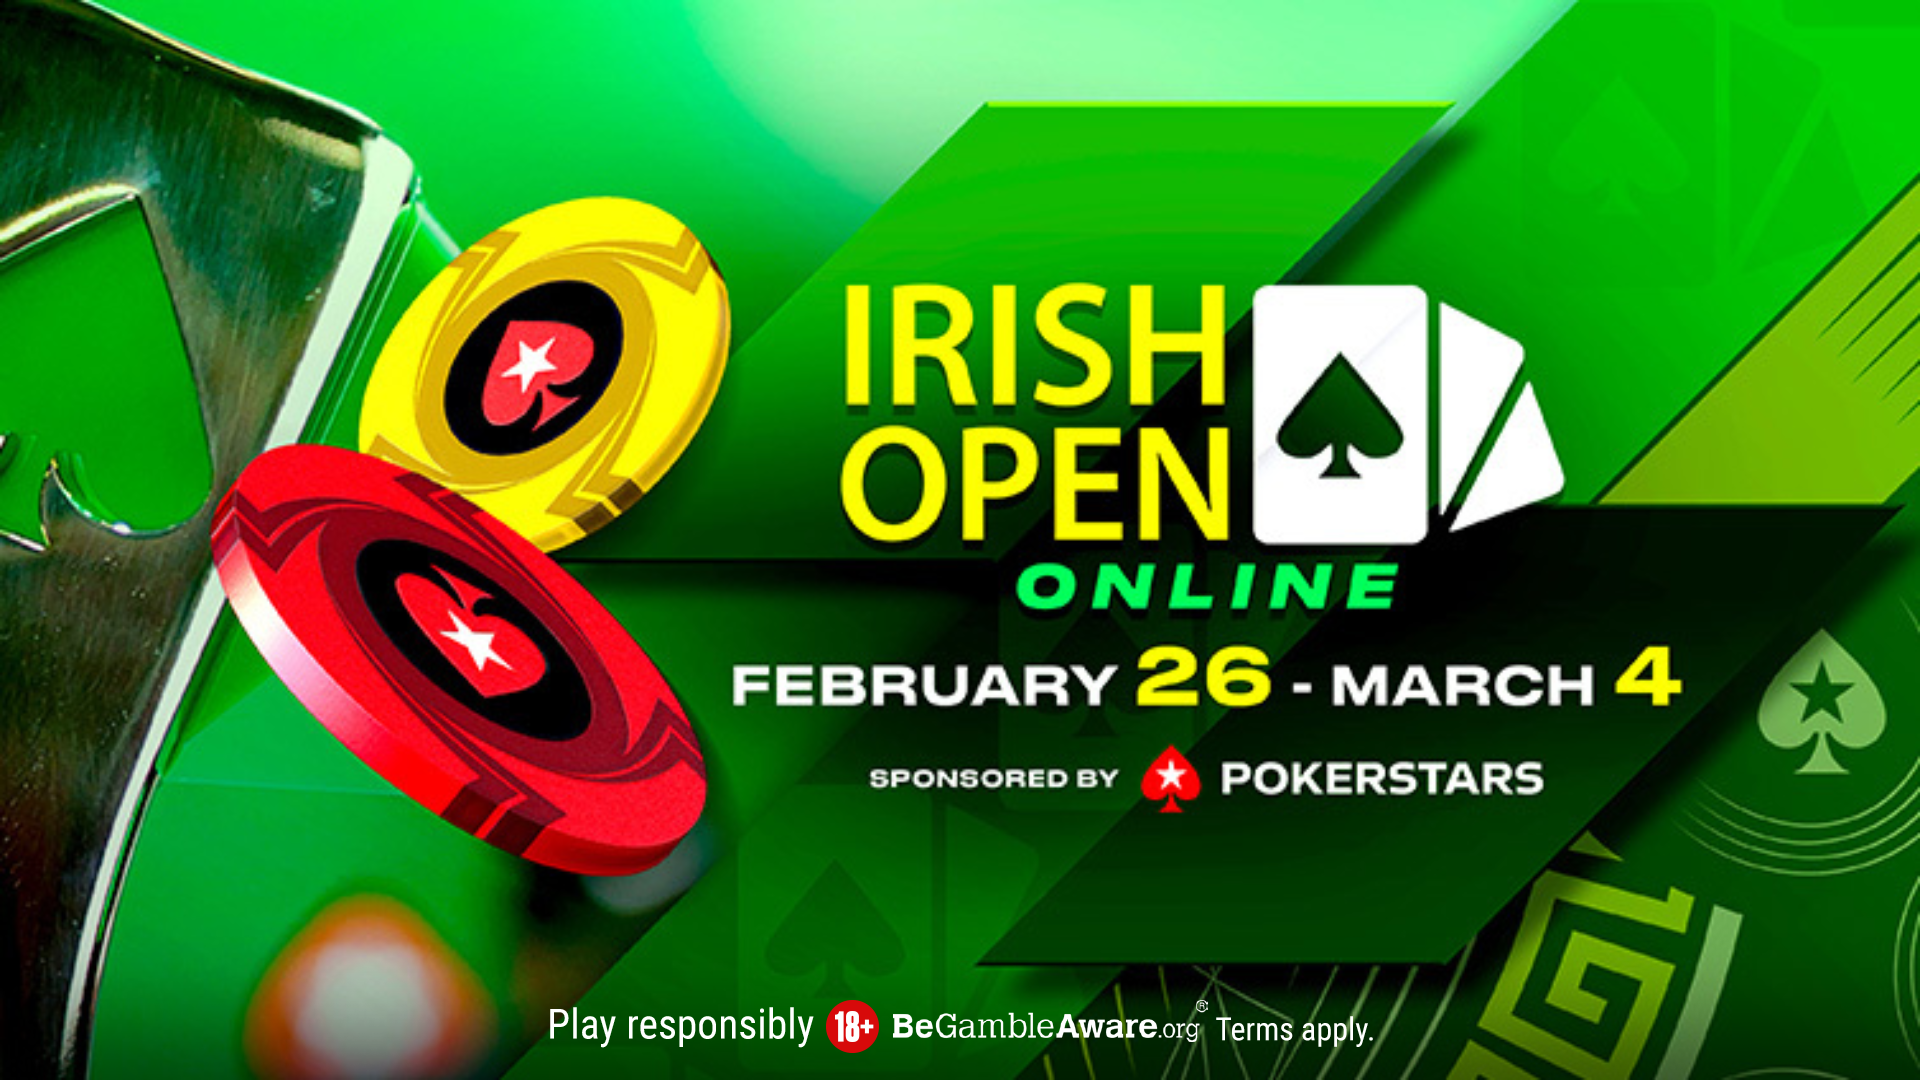 Photo of More Than $600K GTD in PokerStars Irish Open Online Schedule; 17 Packages To Be Awarded